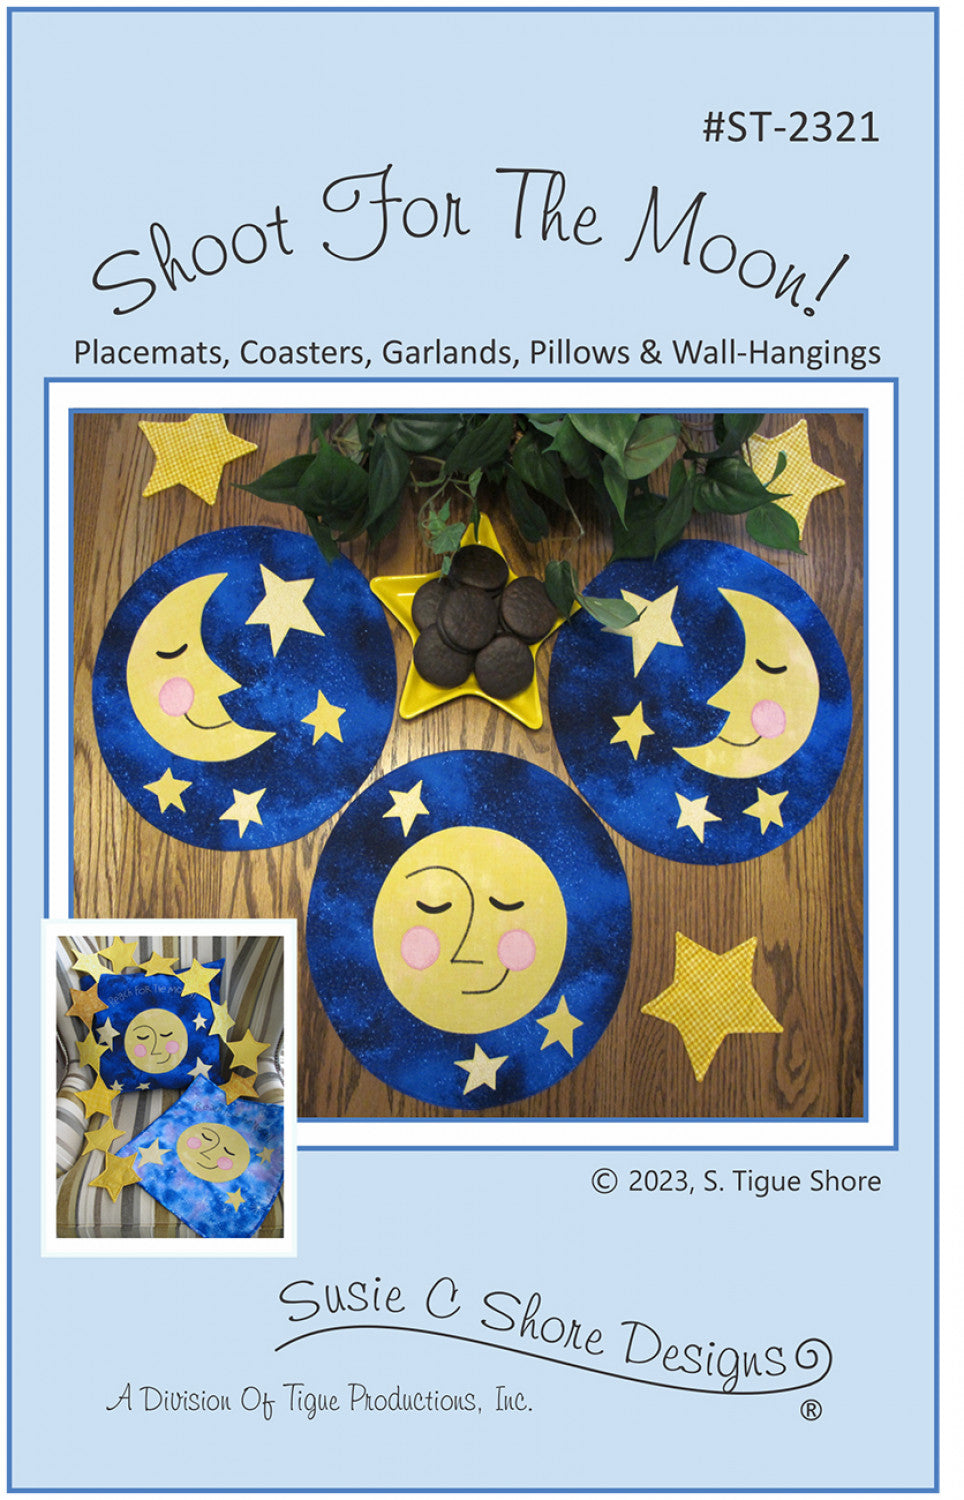 Reach For The Moon Sewing and Quilt Pattern by Suzanne Tigue Shore for Susie C Shore Designs